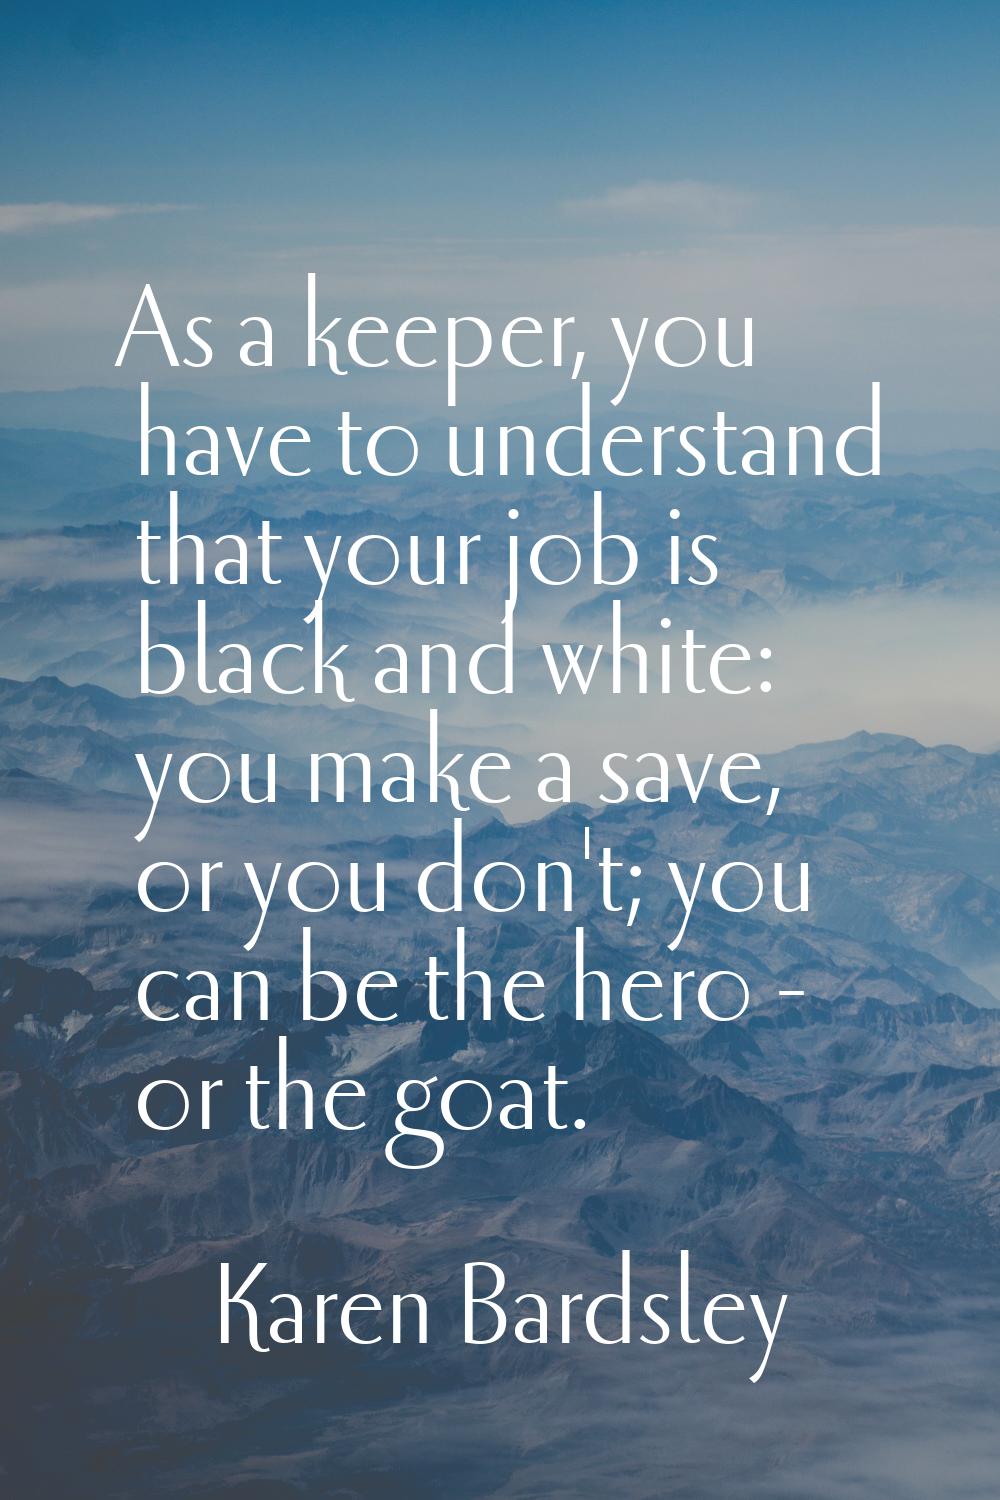 As a keeper, you have to understand that your job is black and white: you make a save, or you don't